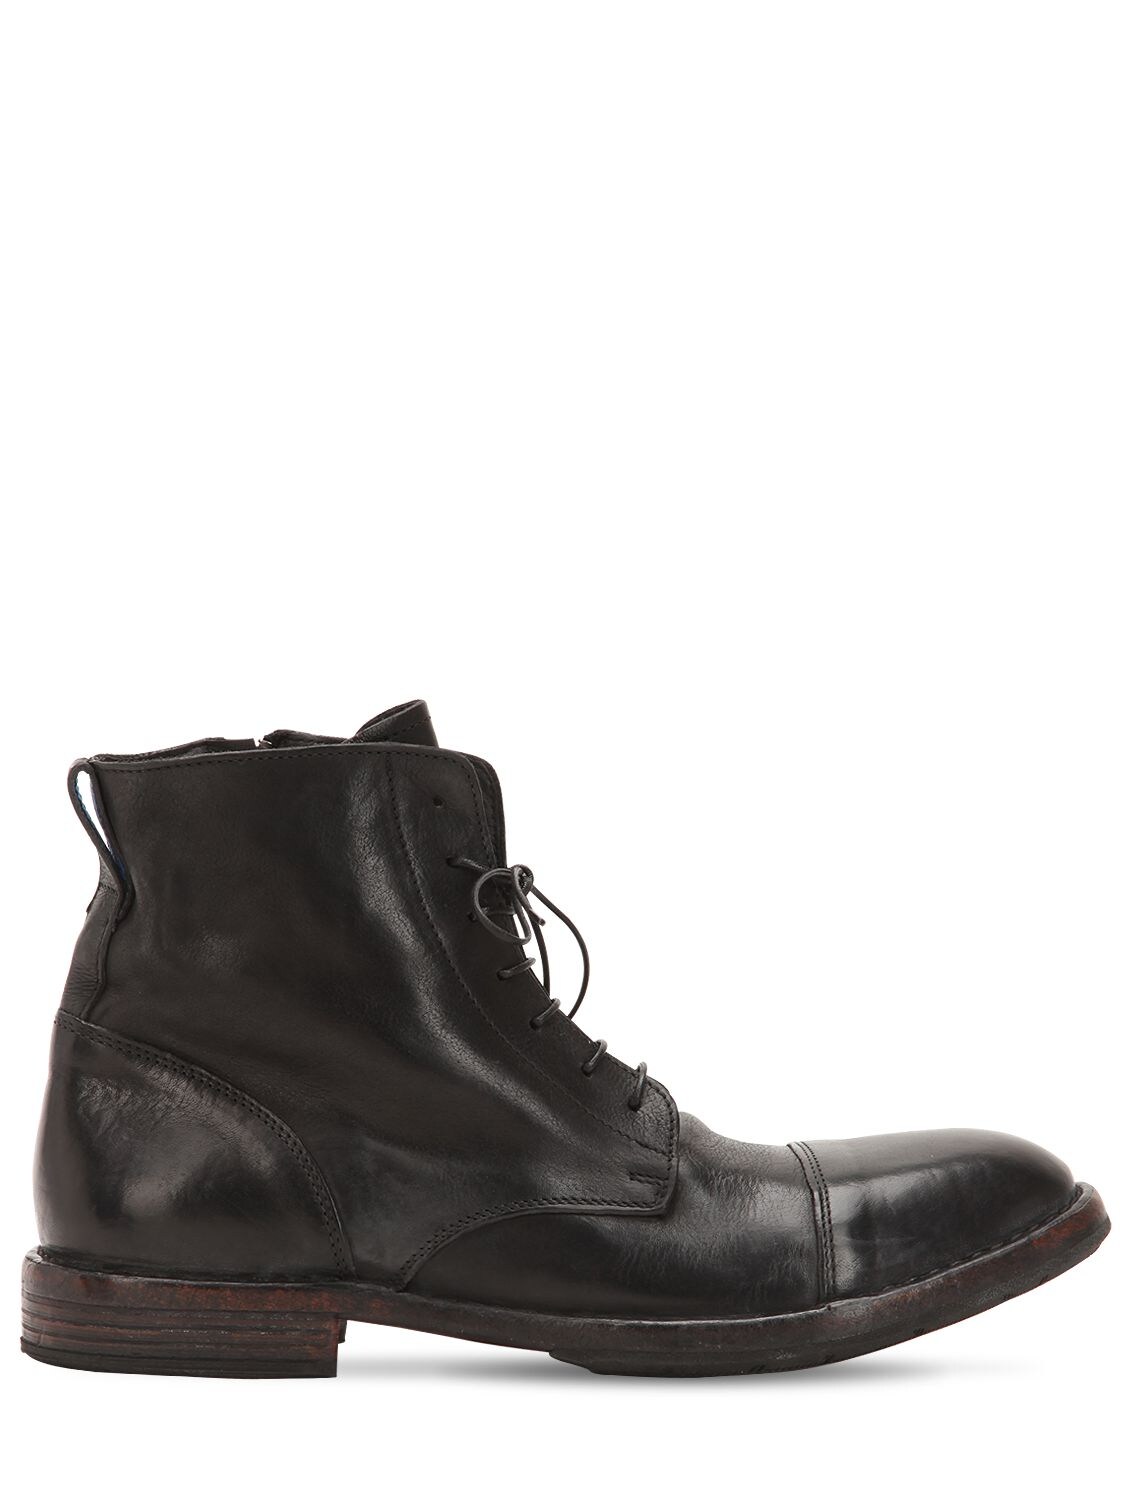 Moma Vintage Leather Boots In Black